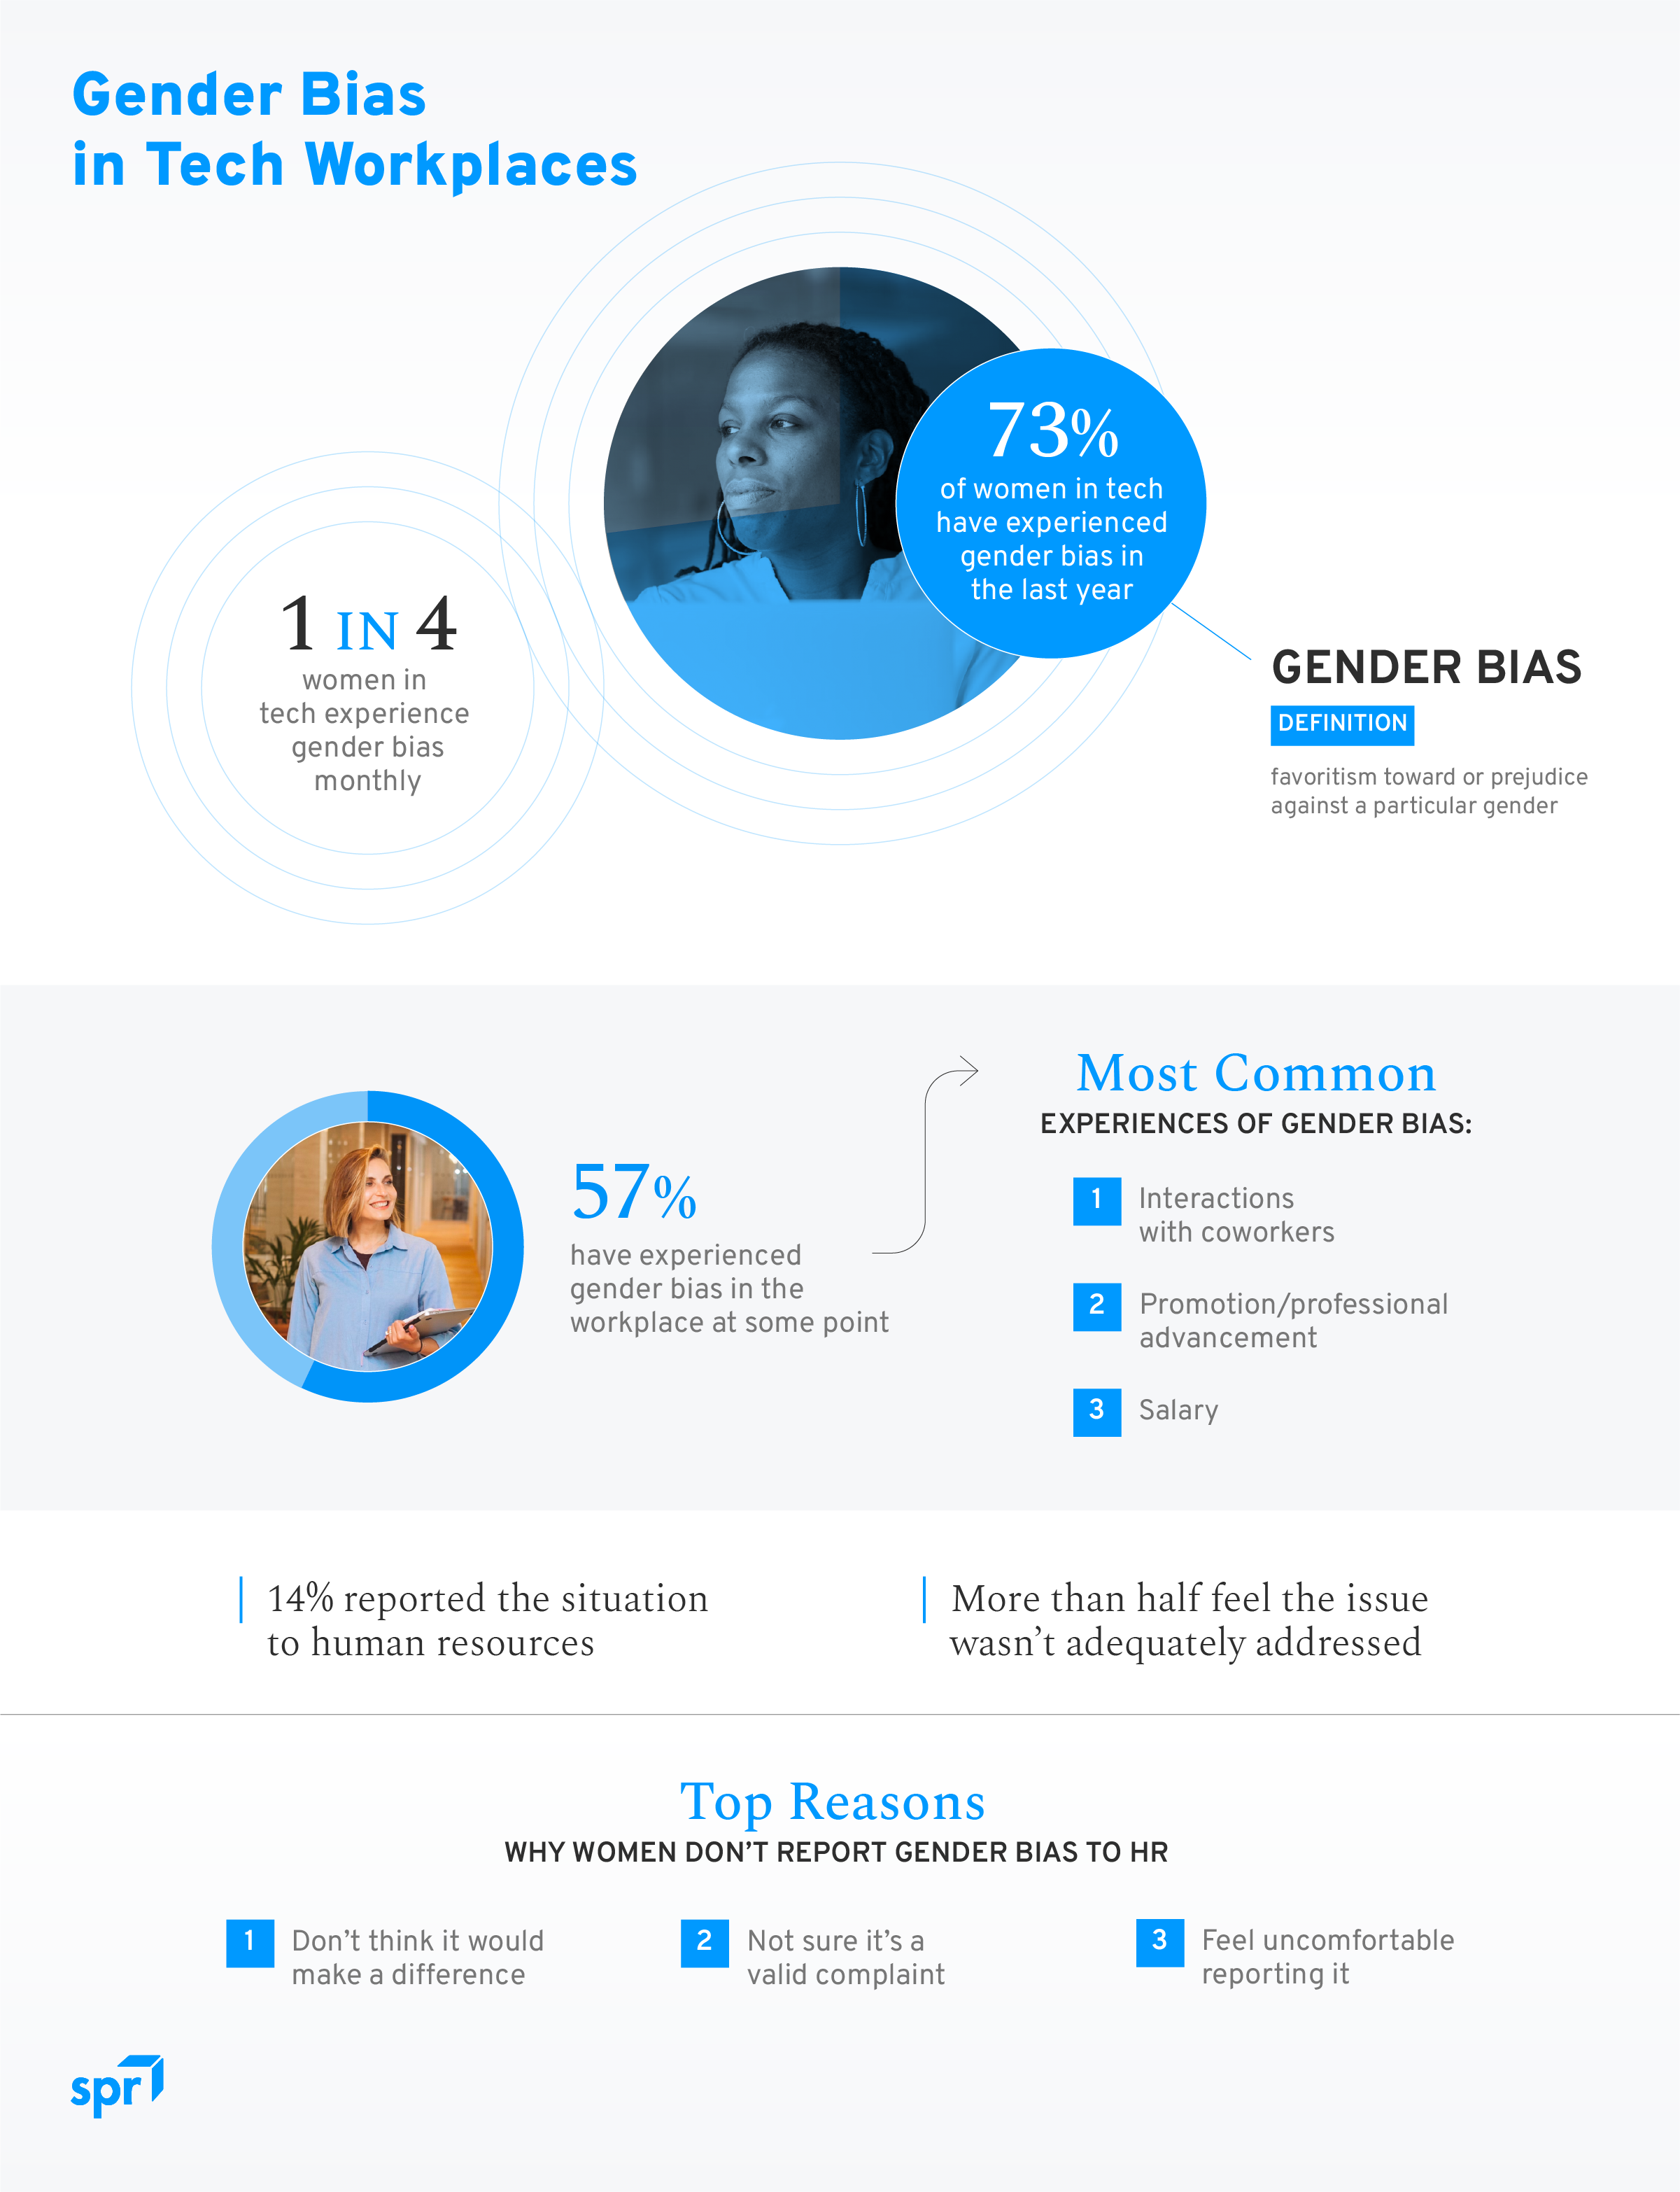 Gender bias experiences and statistics among women in tech infographic from spr.com